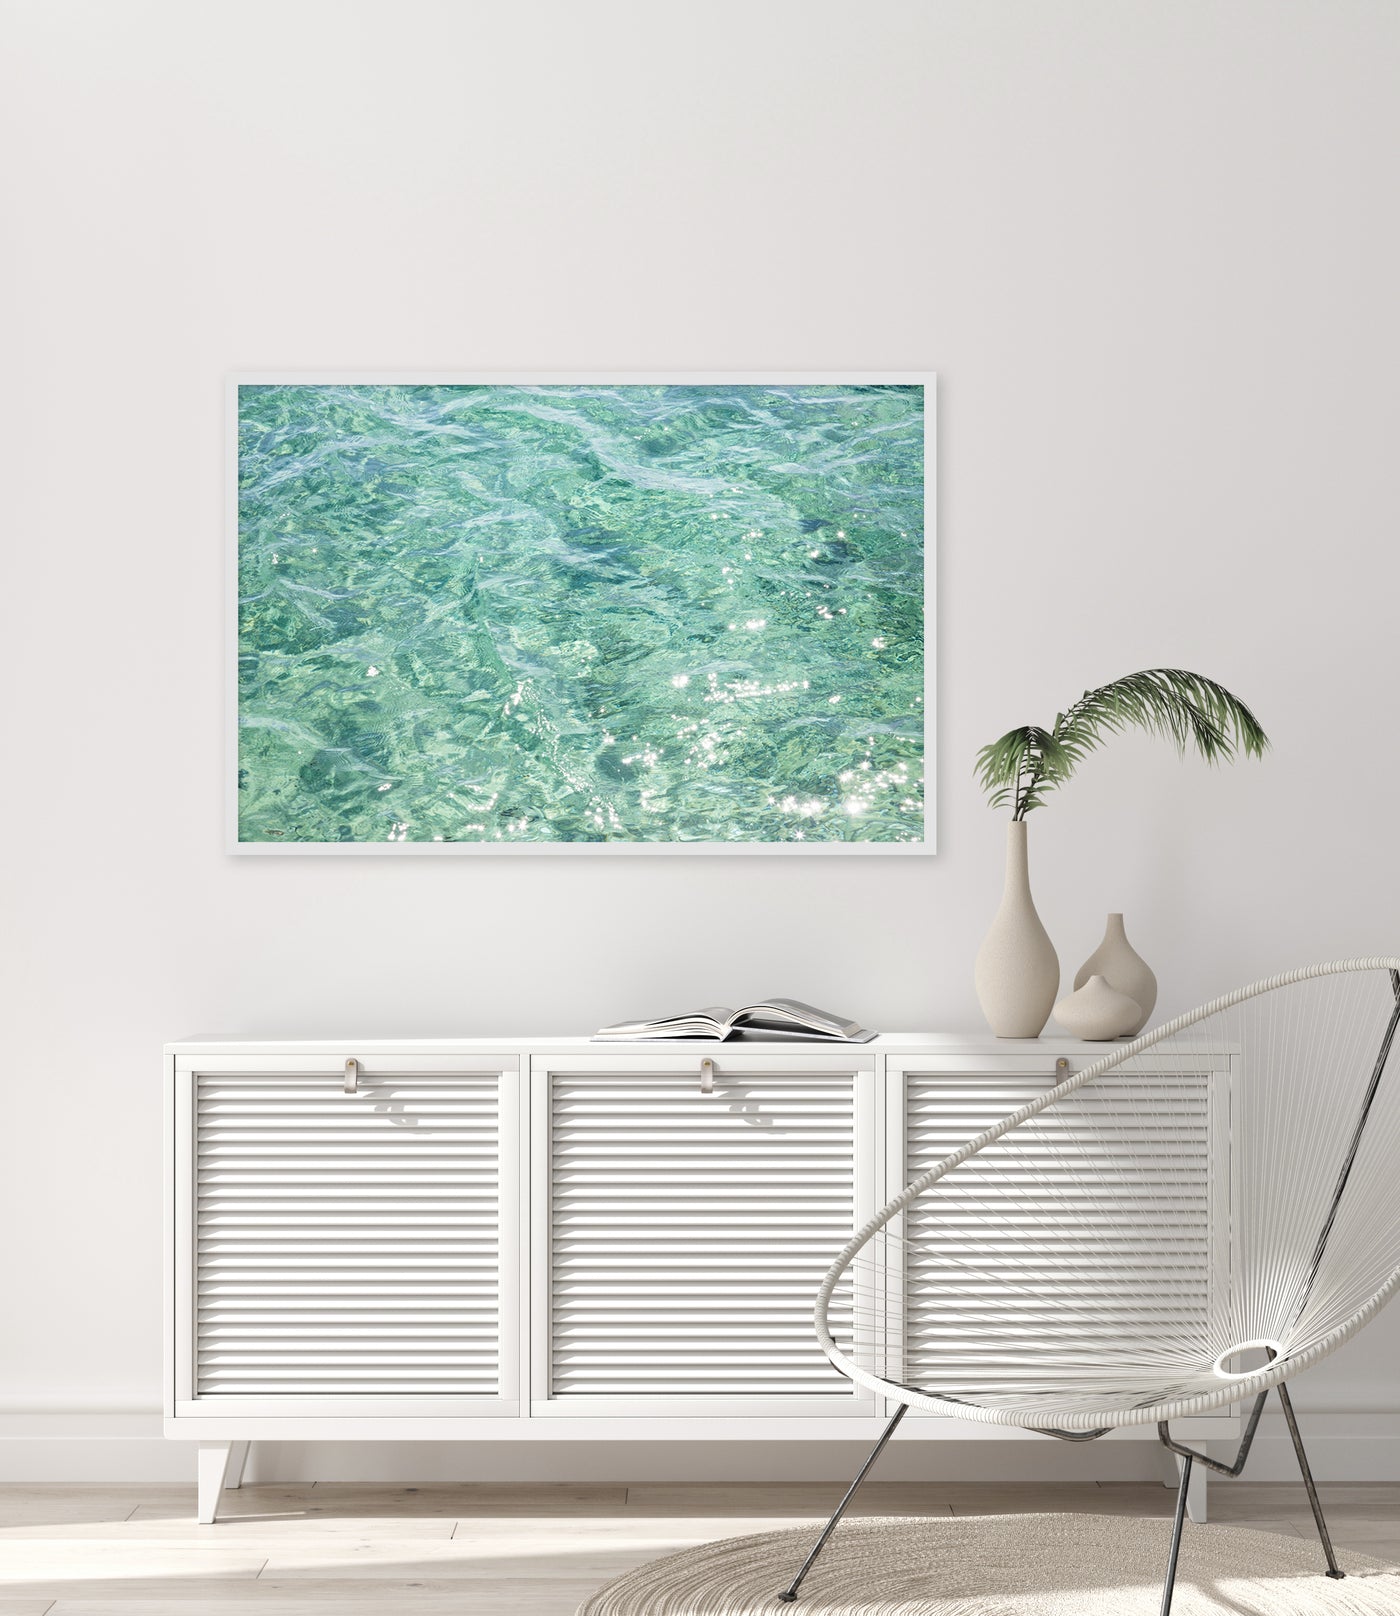 Abstract Water - Green art print by Cattie Coyle Photography above dresser in modern beach house